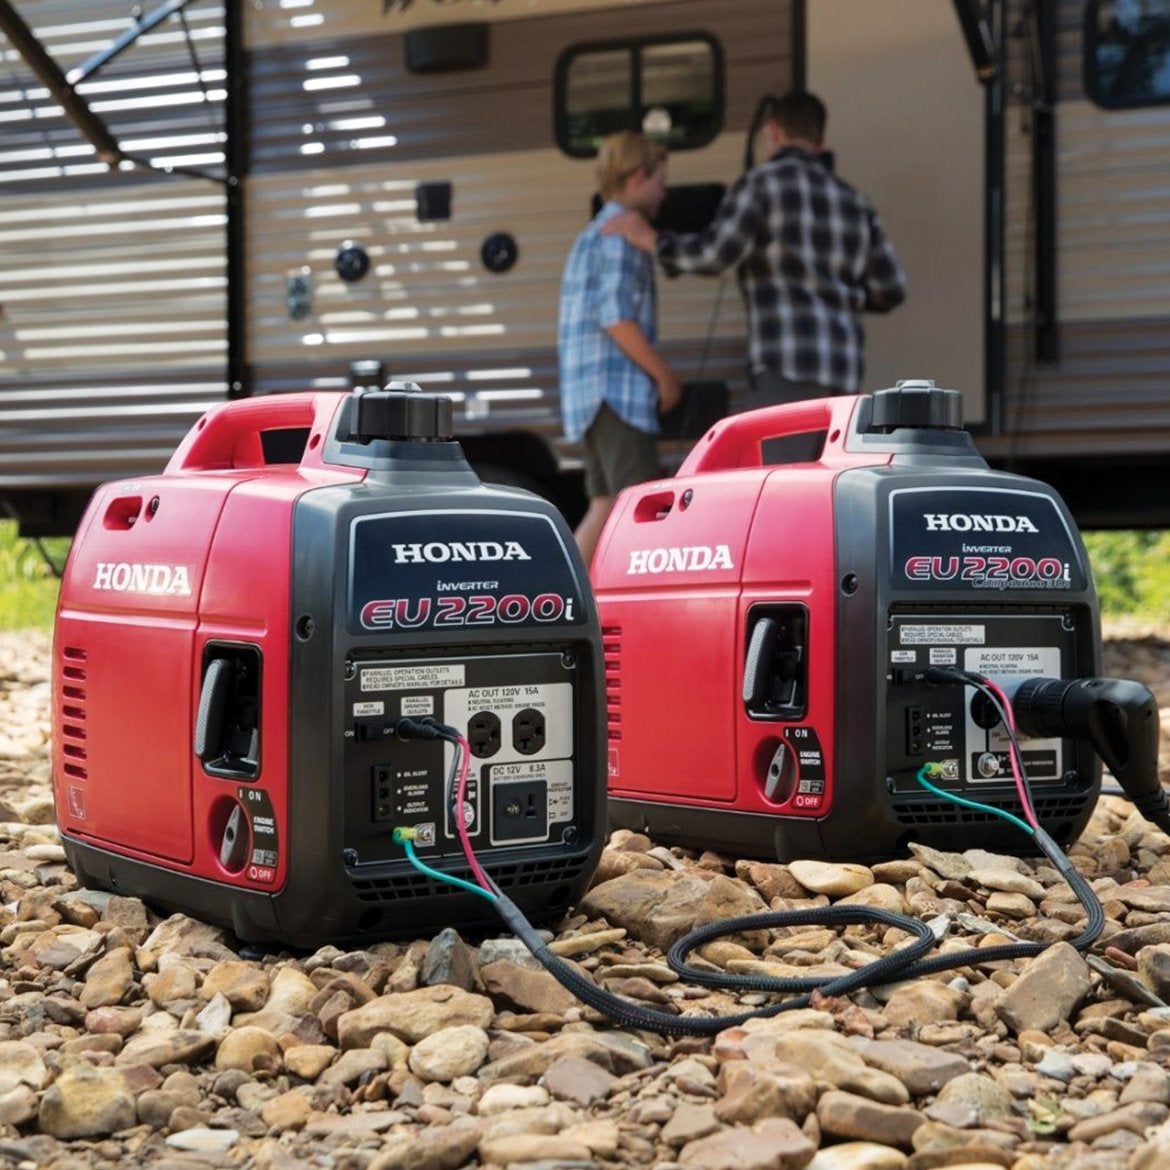 two portable generators on the ground near an RV